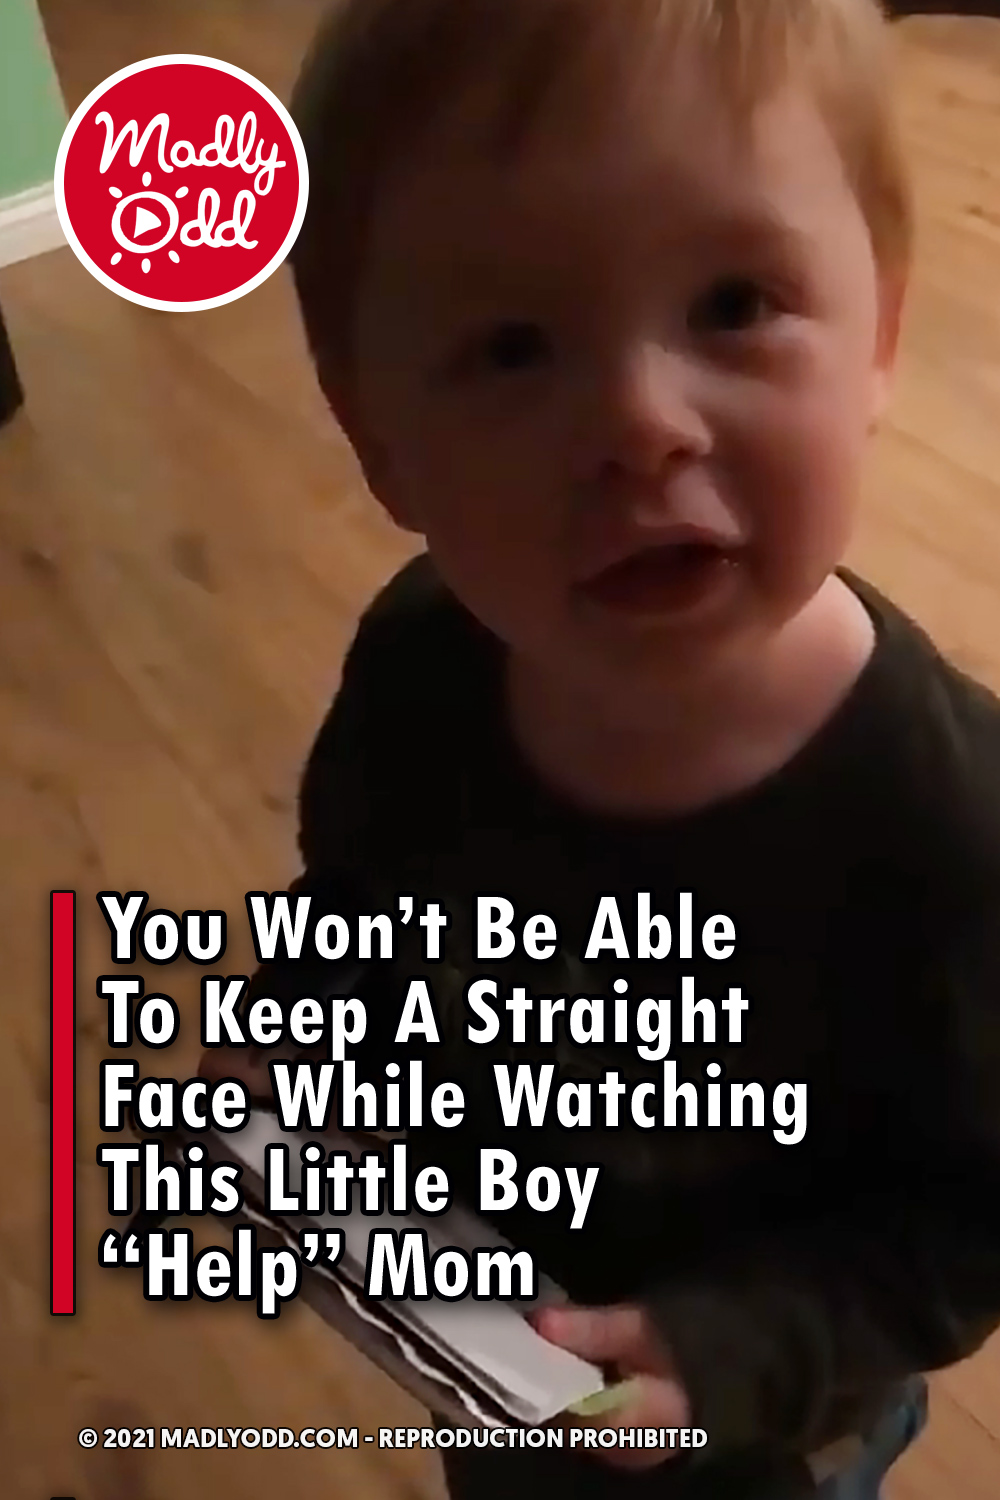 You Won’t Be Able To Keep A Straight Face While Watching This Little Boy “Help” Mom